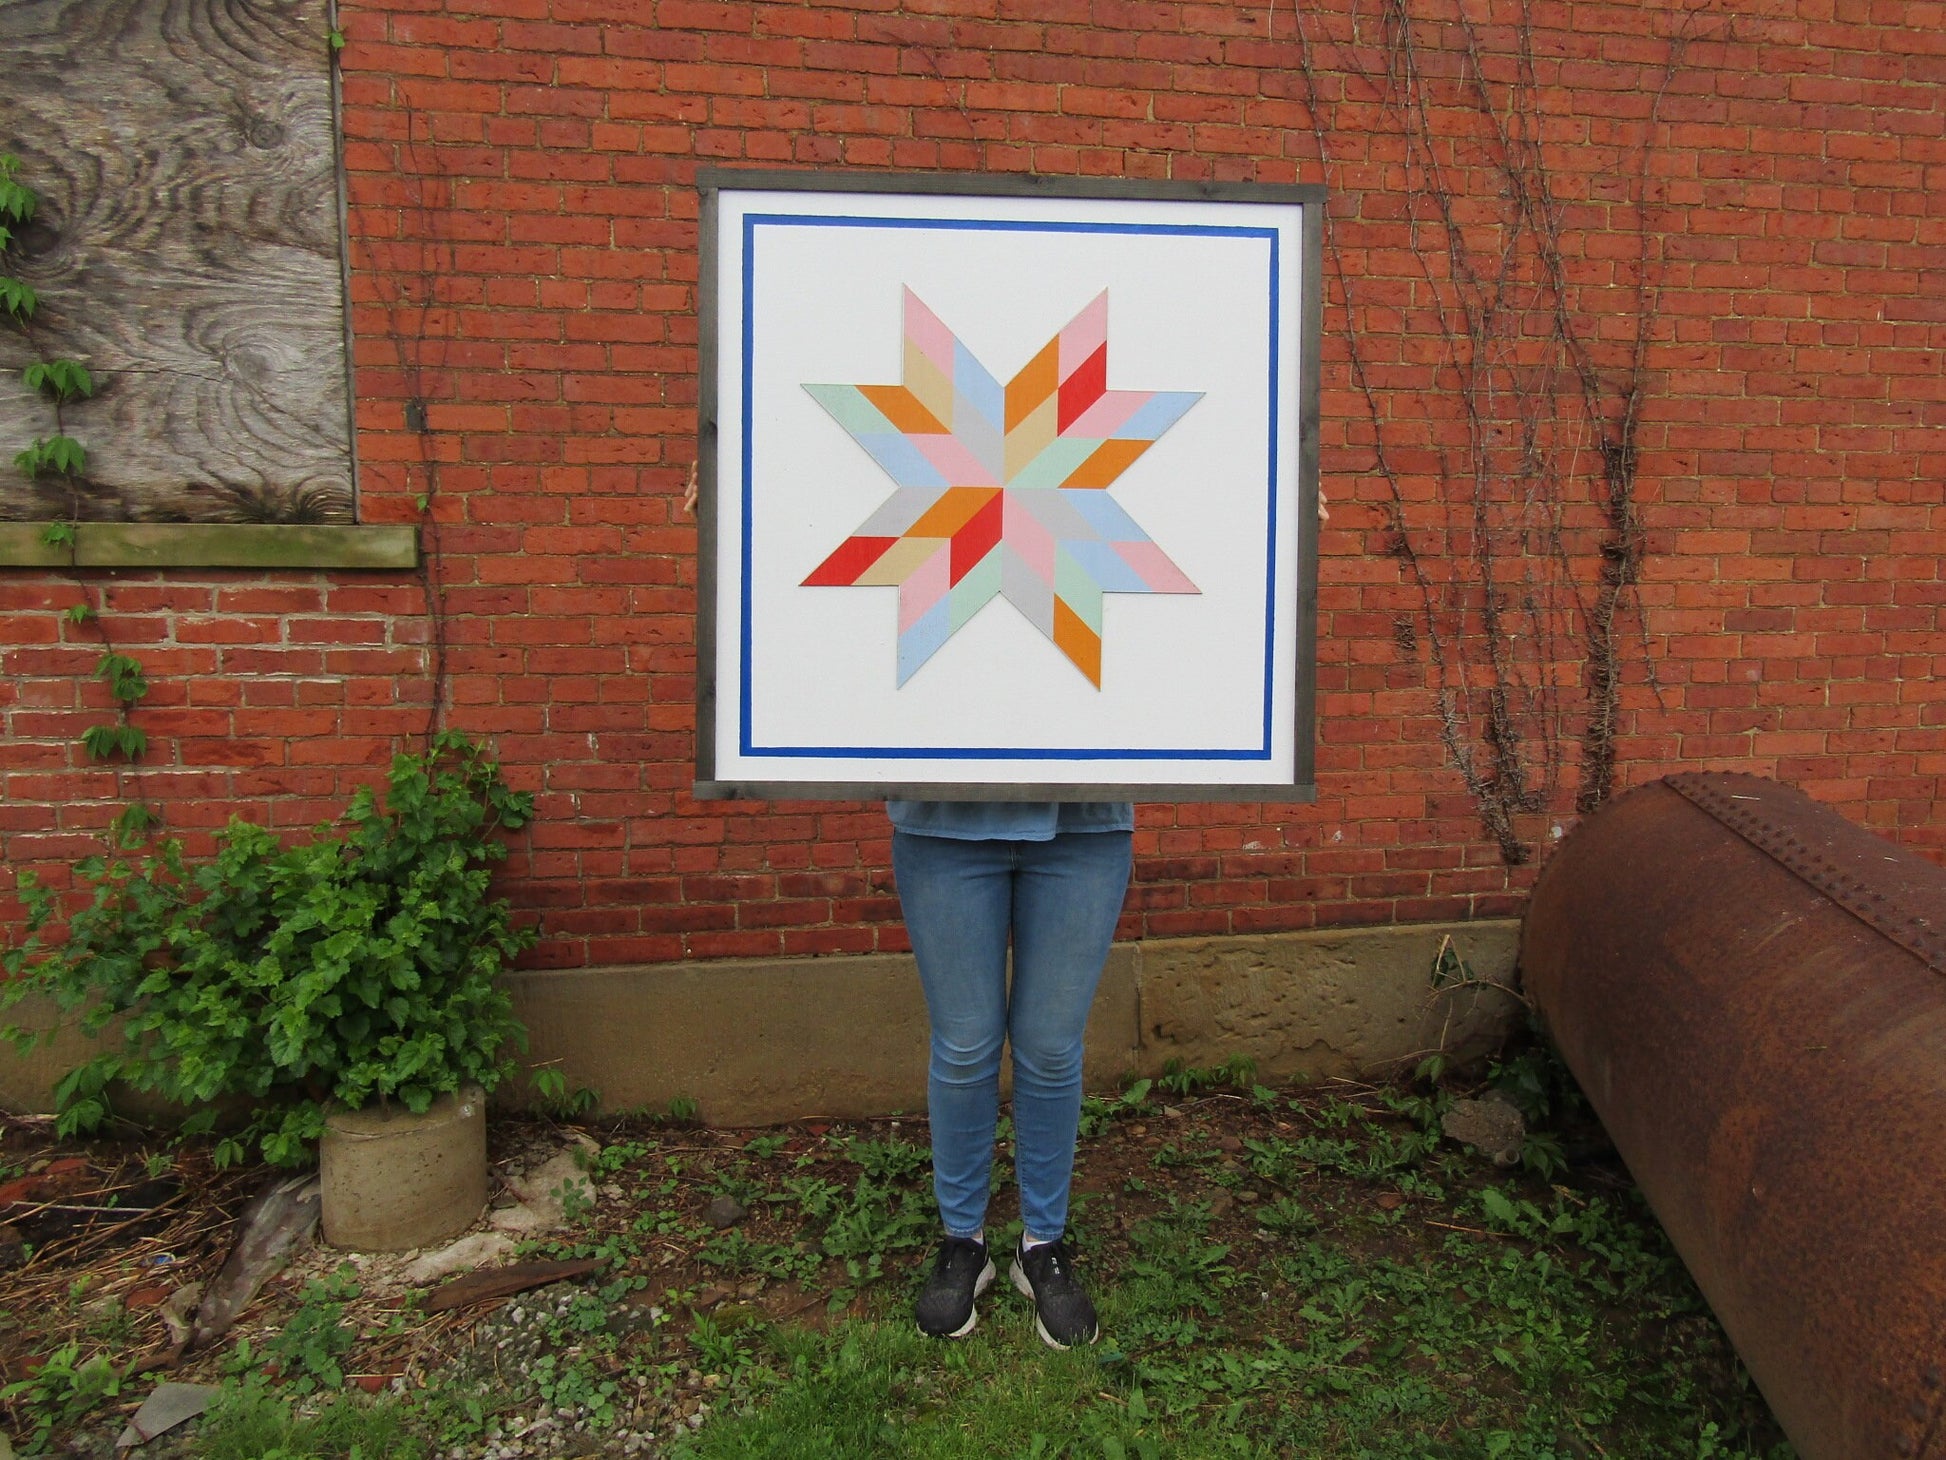 Oversized Square Barn Quilt Image Printed On Wood Color Pastel Geometrical Farmhouse Country Style Handmade Decor Star Outdoor Primitive